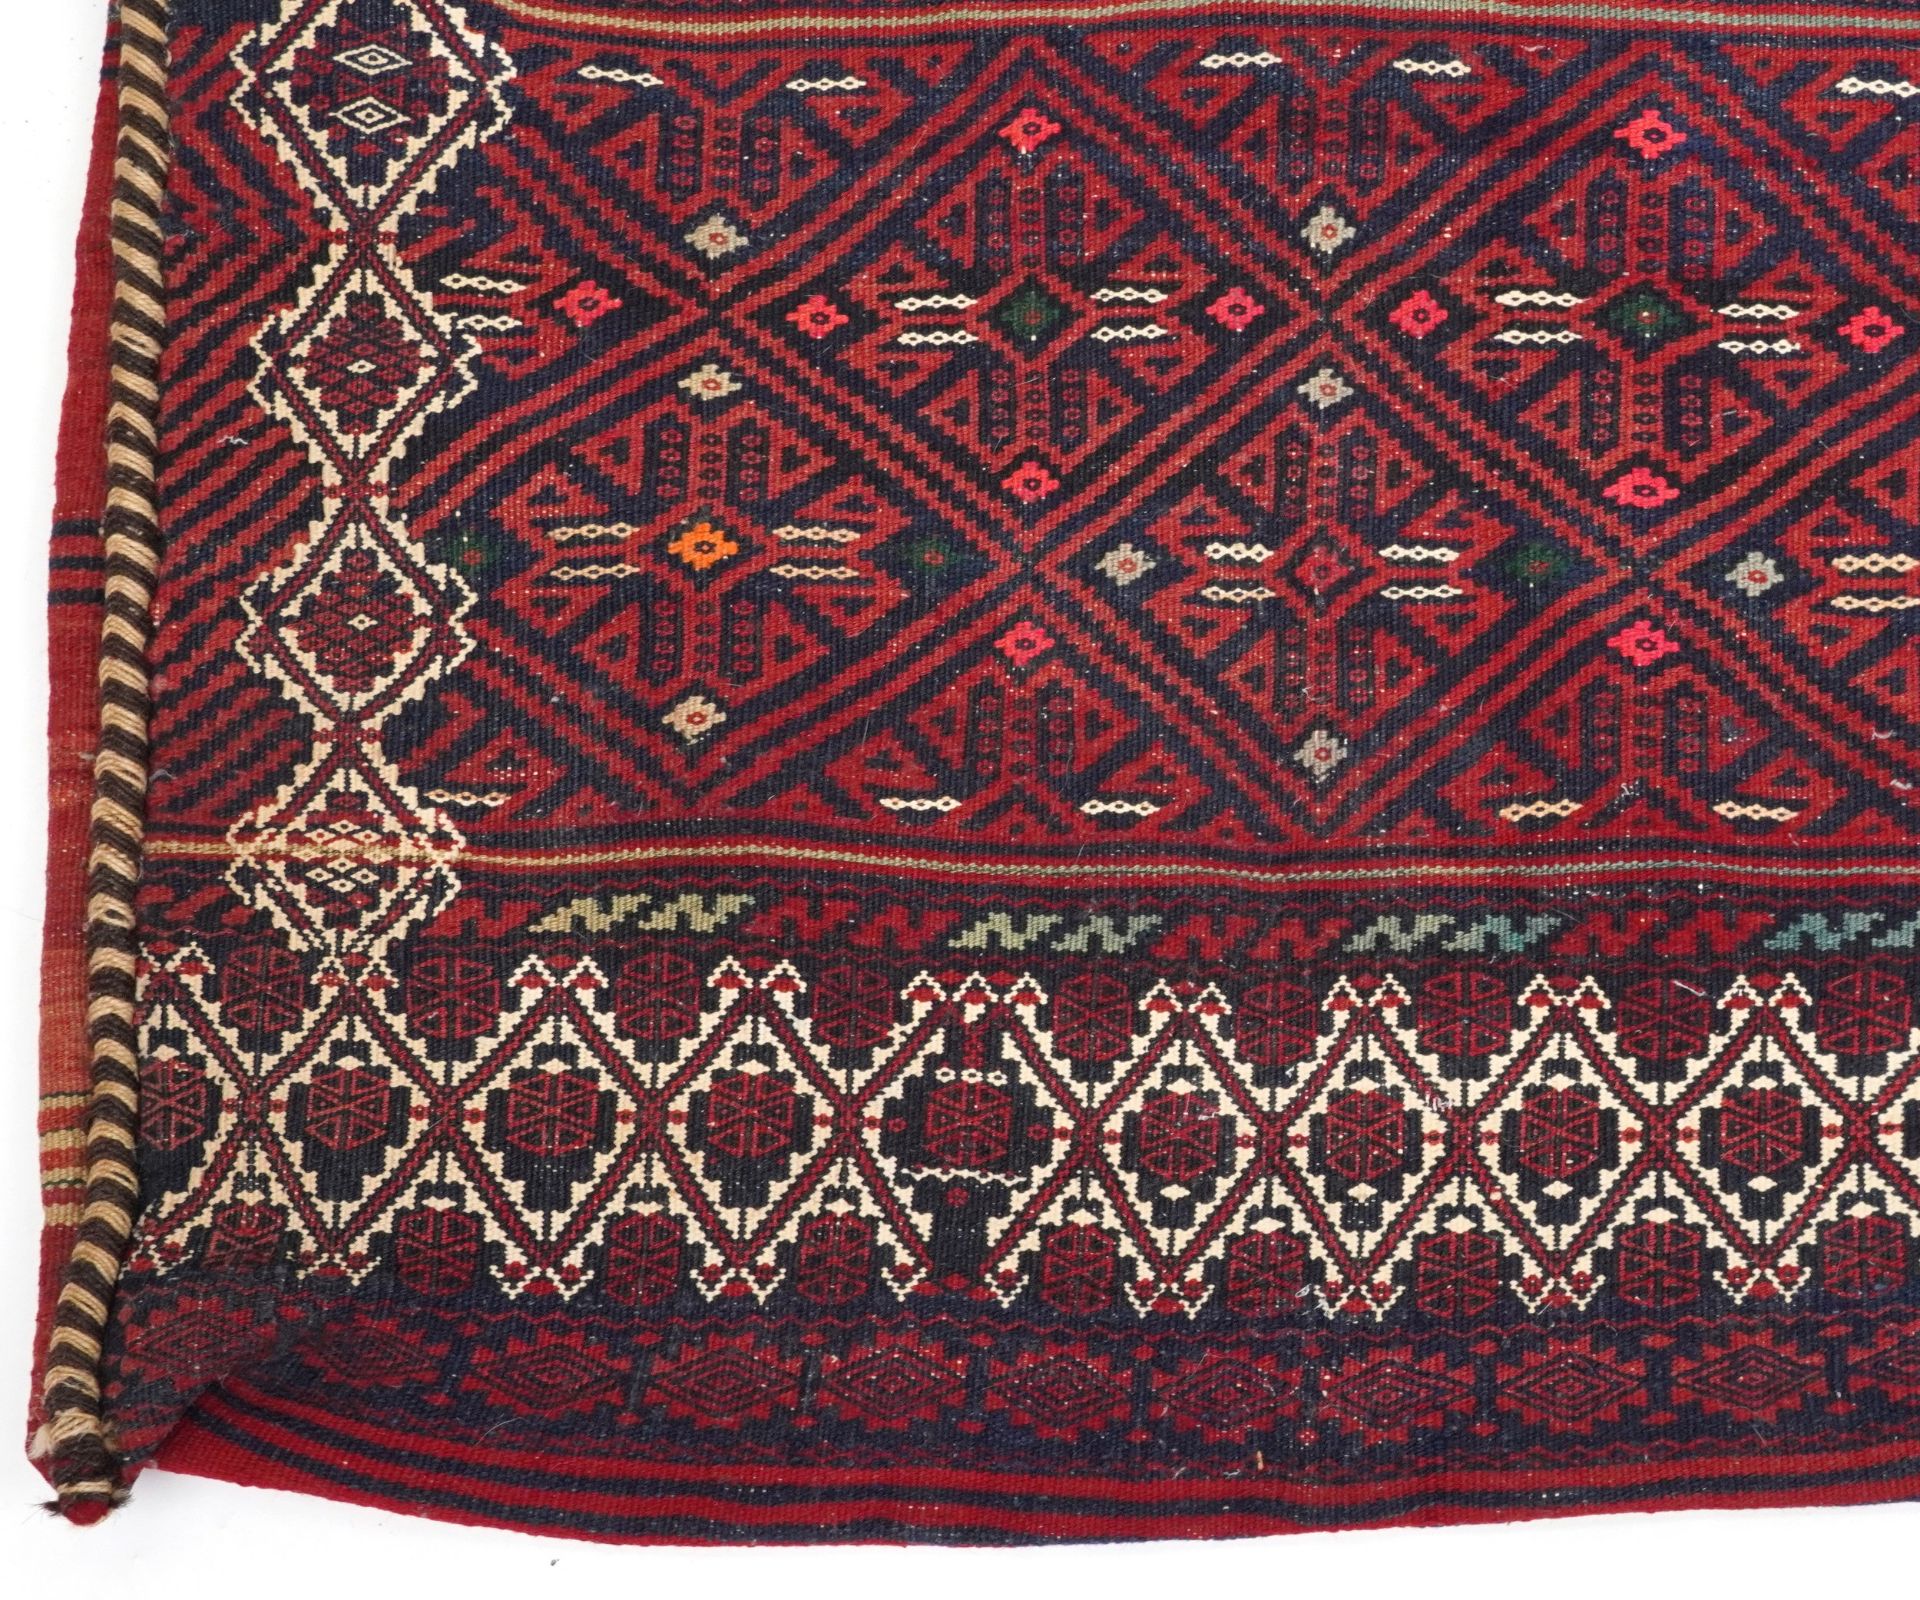 Rectangular Afghan red ground saddle bag having an allover repeat design, 150cm x 80cm : For further - Image 4 of 7